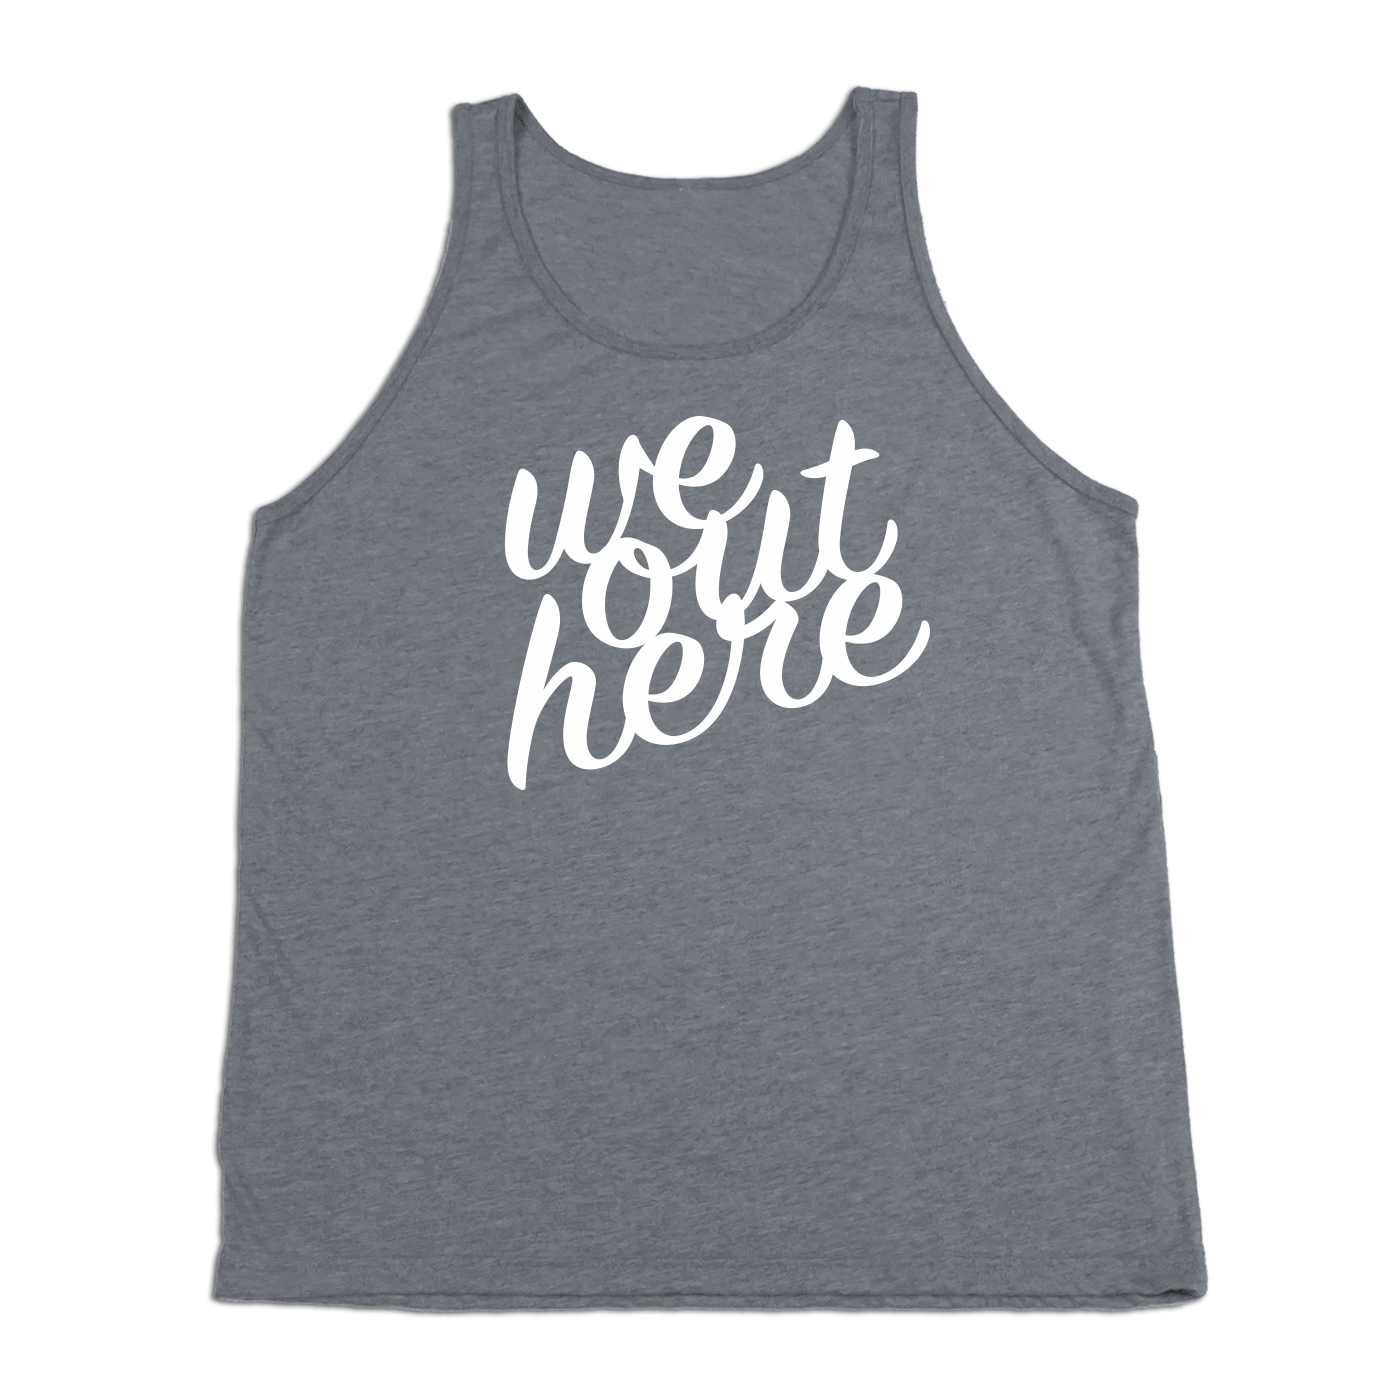 #WEOUTHERE TriBlend Tank Top - Hat Mount for GoPro